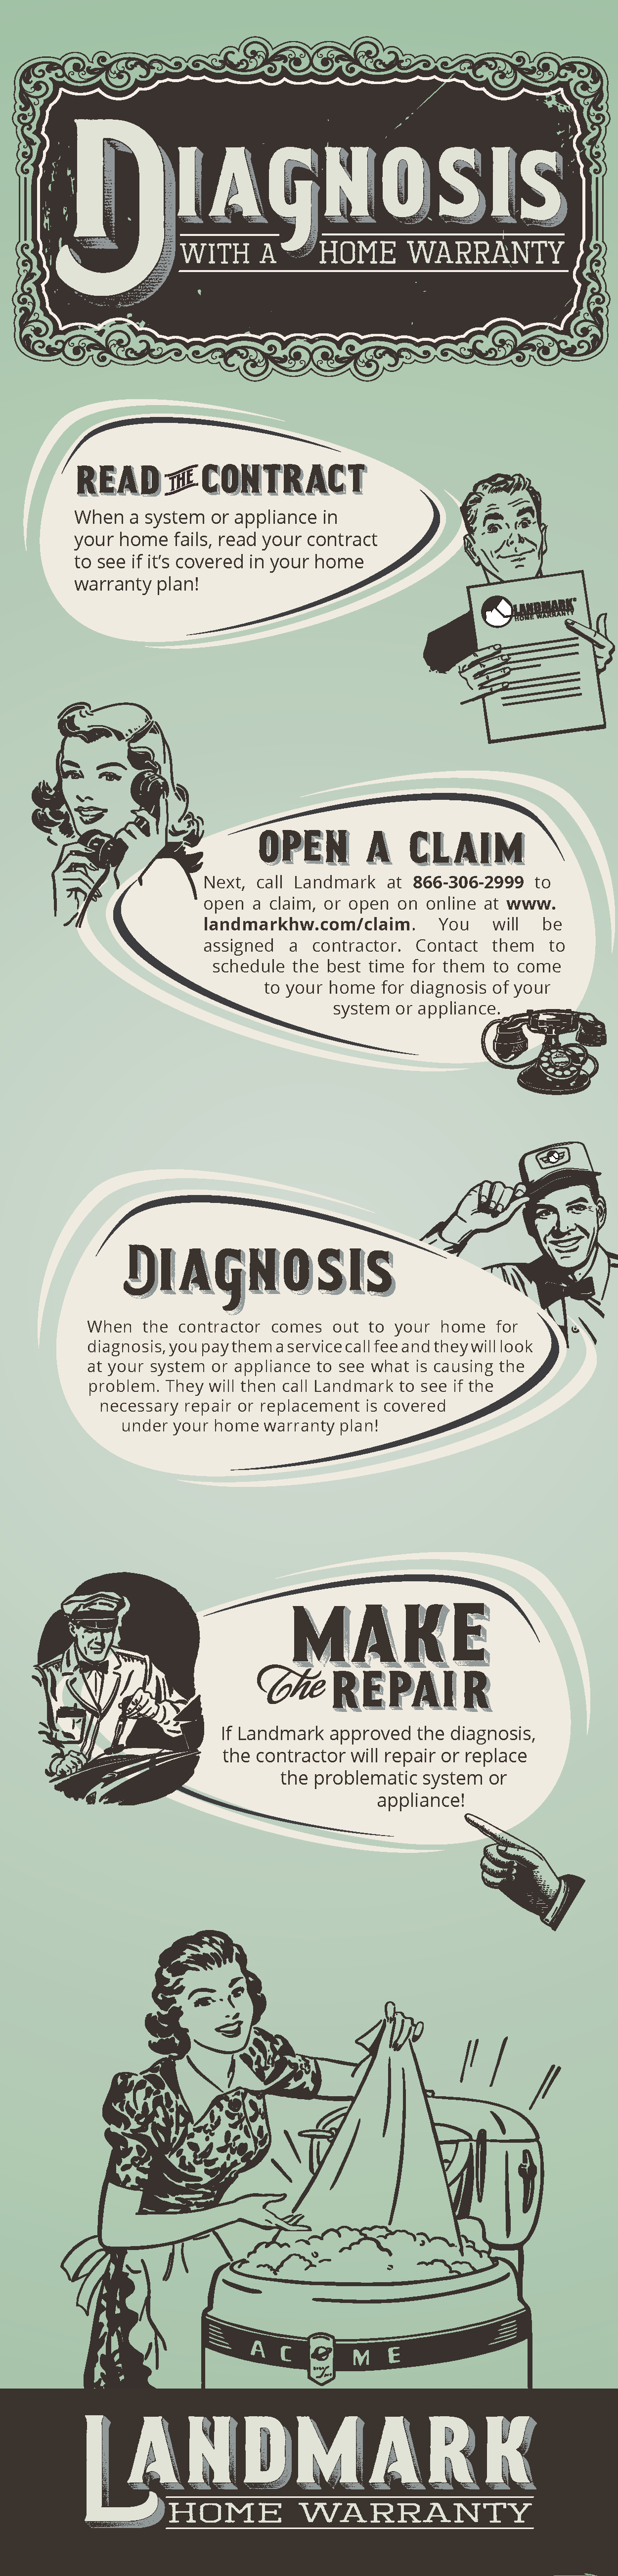 Diagnosis with a home warranty